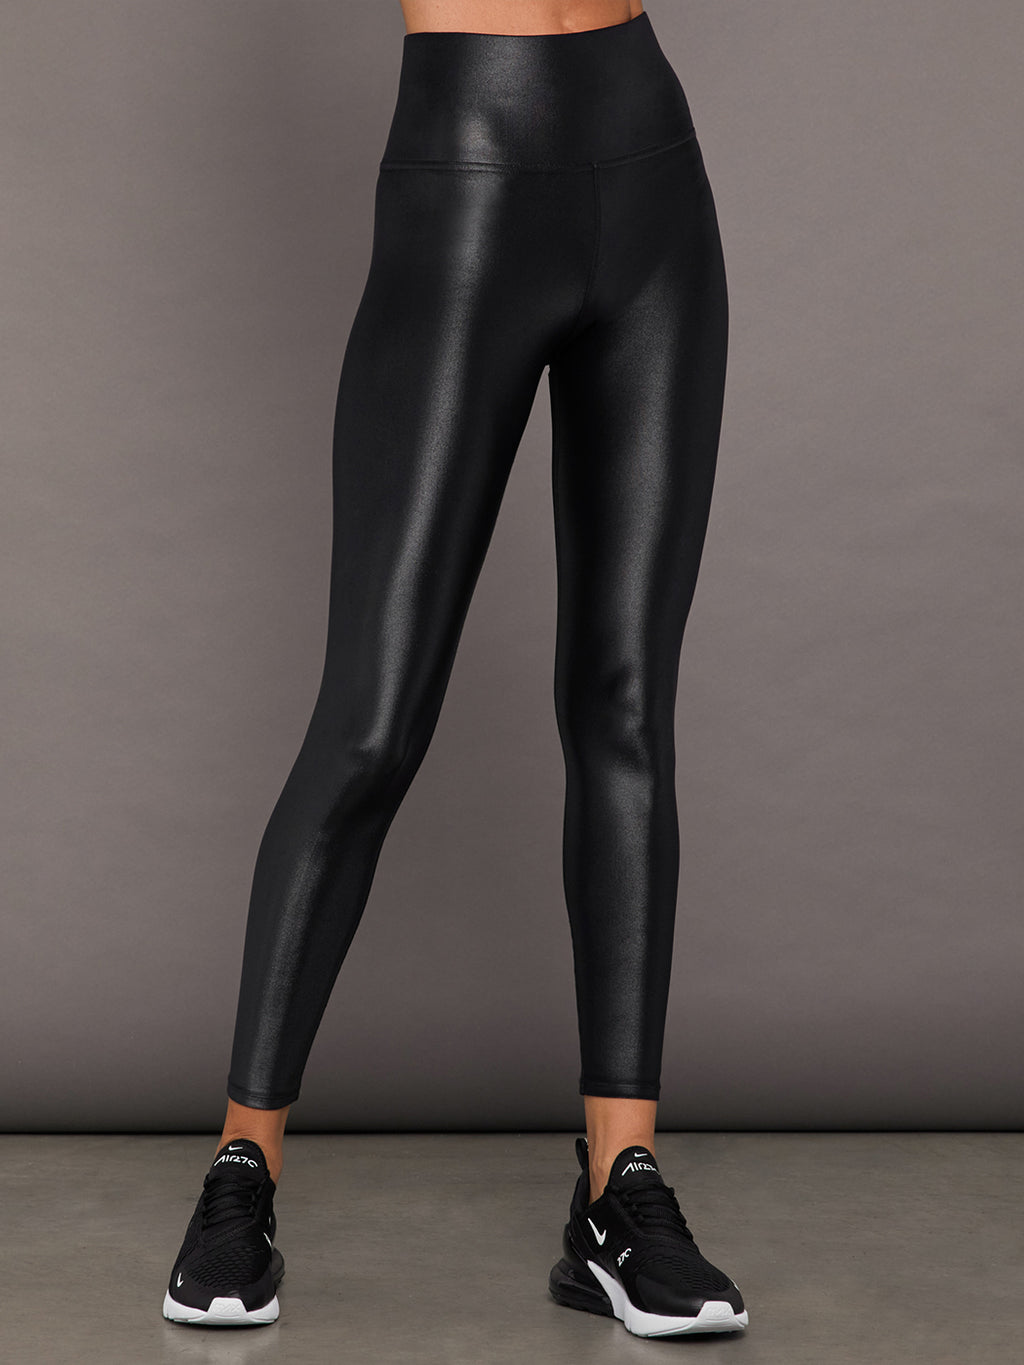 Athletic Leggings By Carbon 38 Size: M